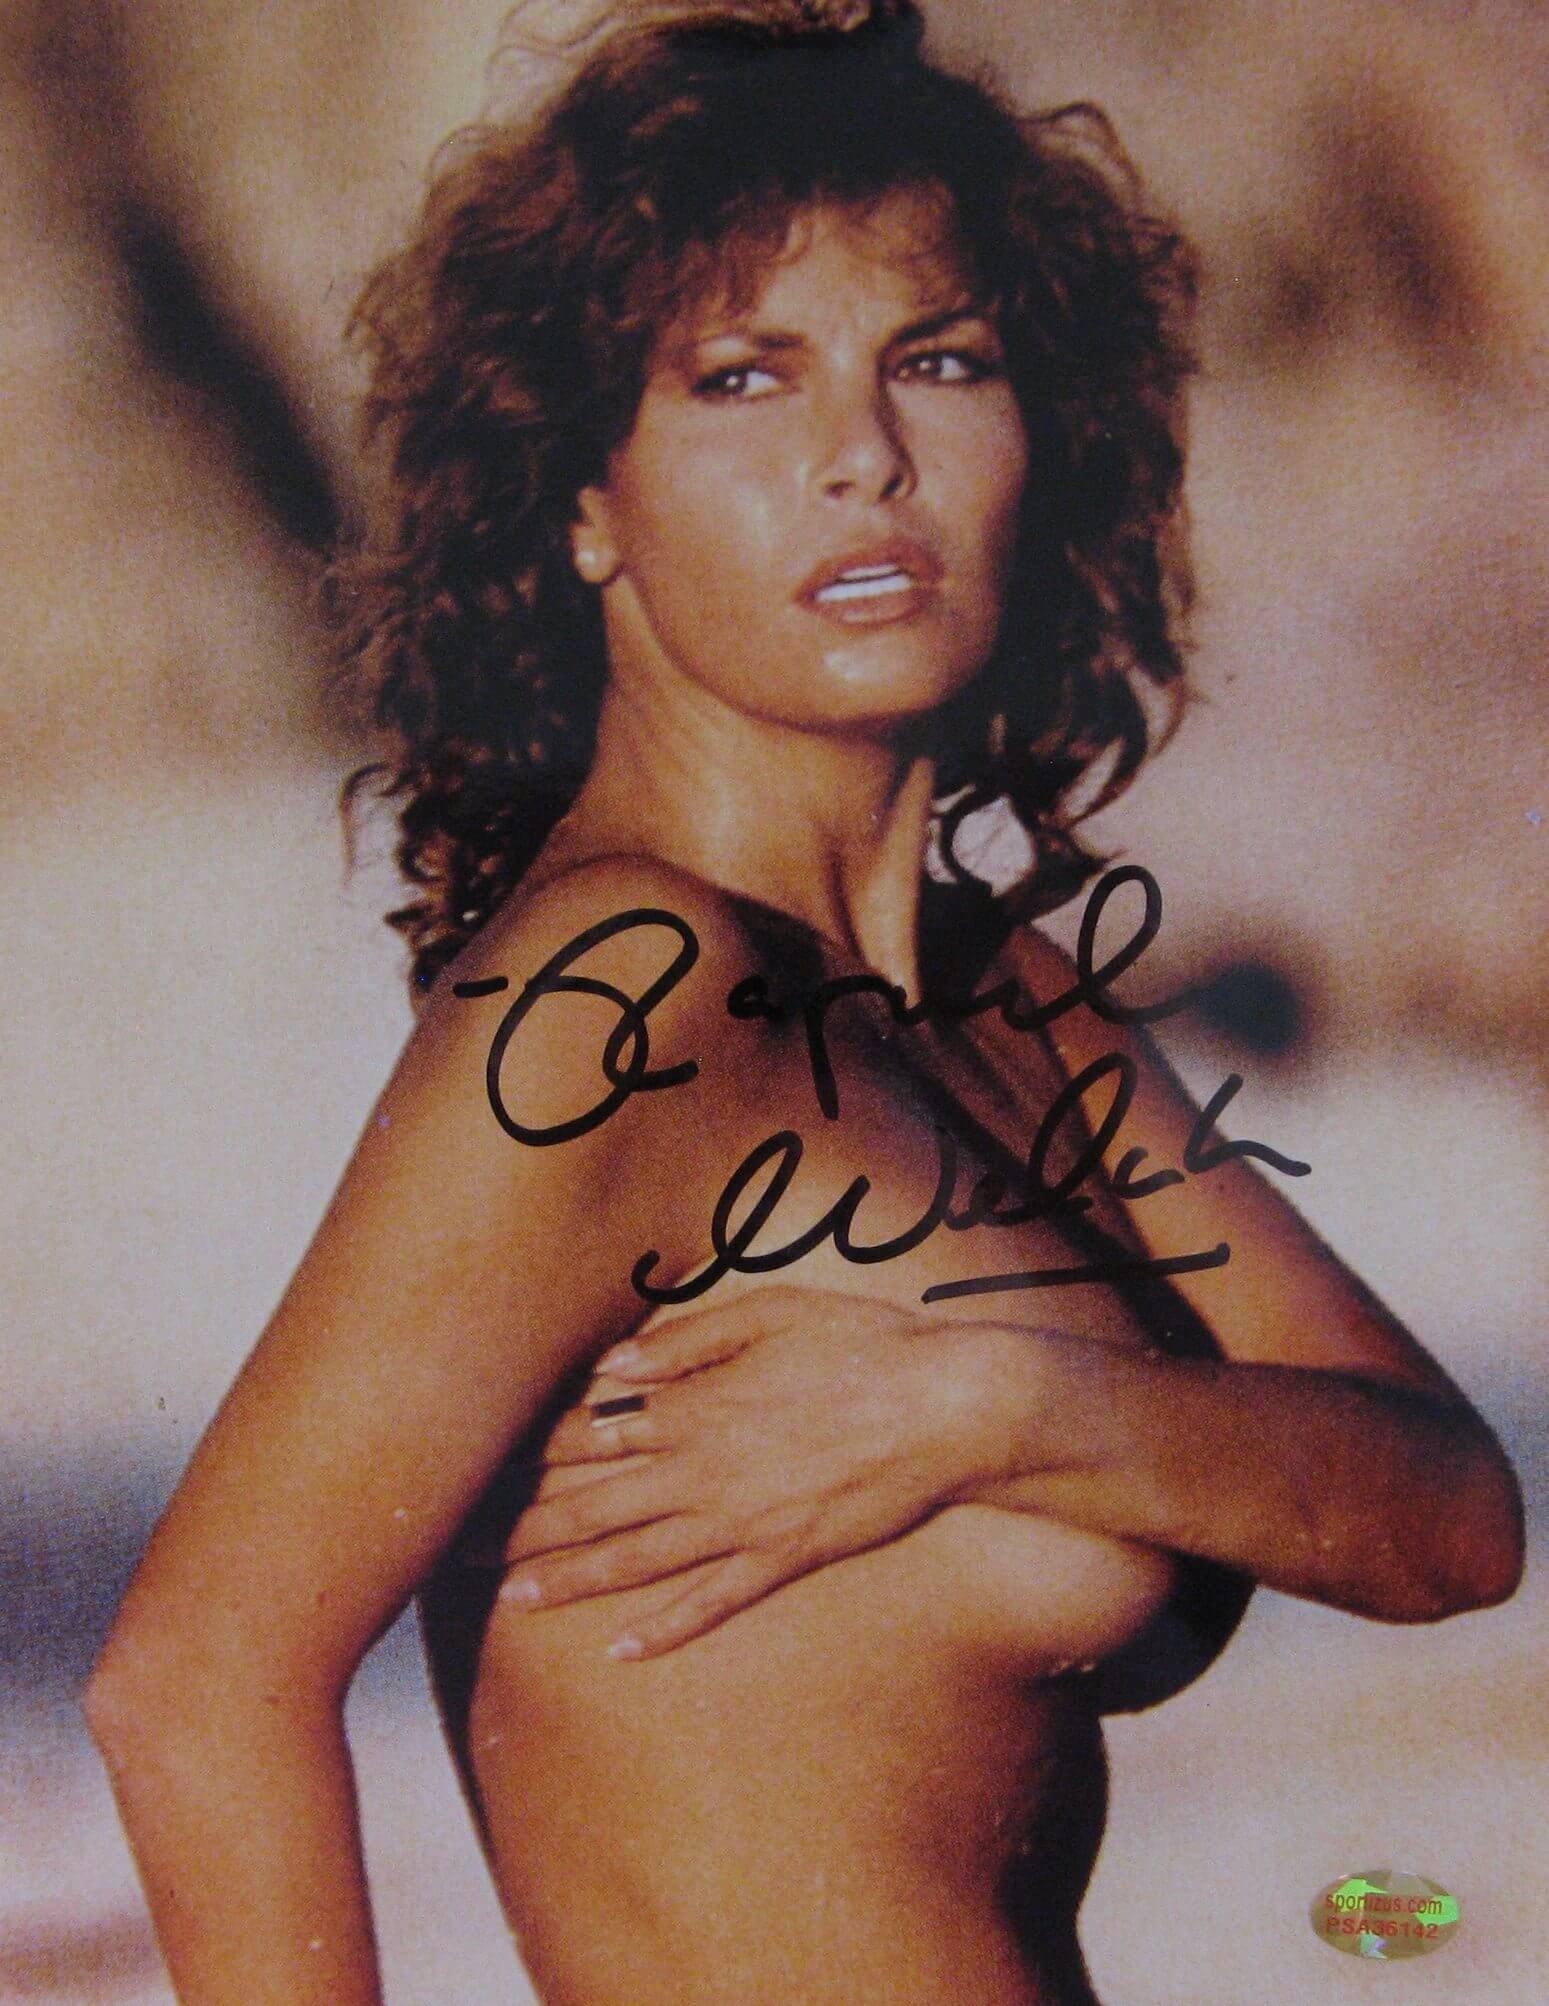 Raquel Welch nude, topless pictures, playboy photos, sex scene uncensored.